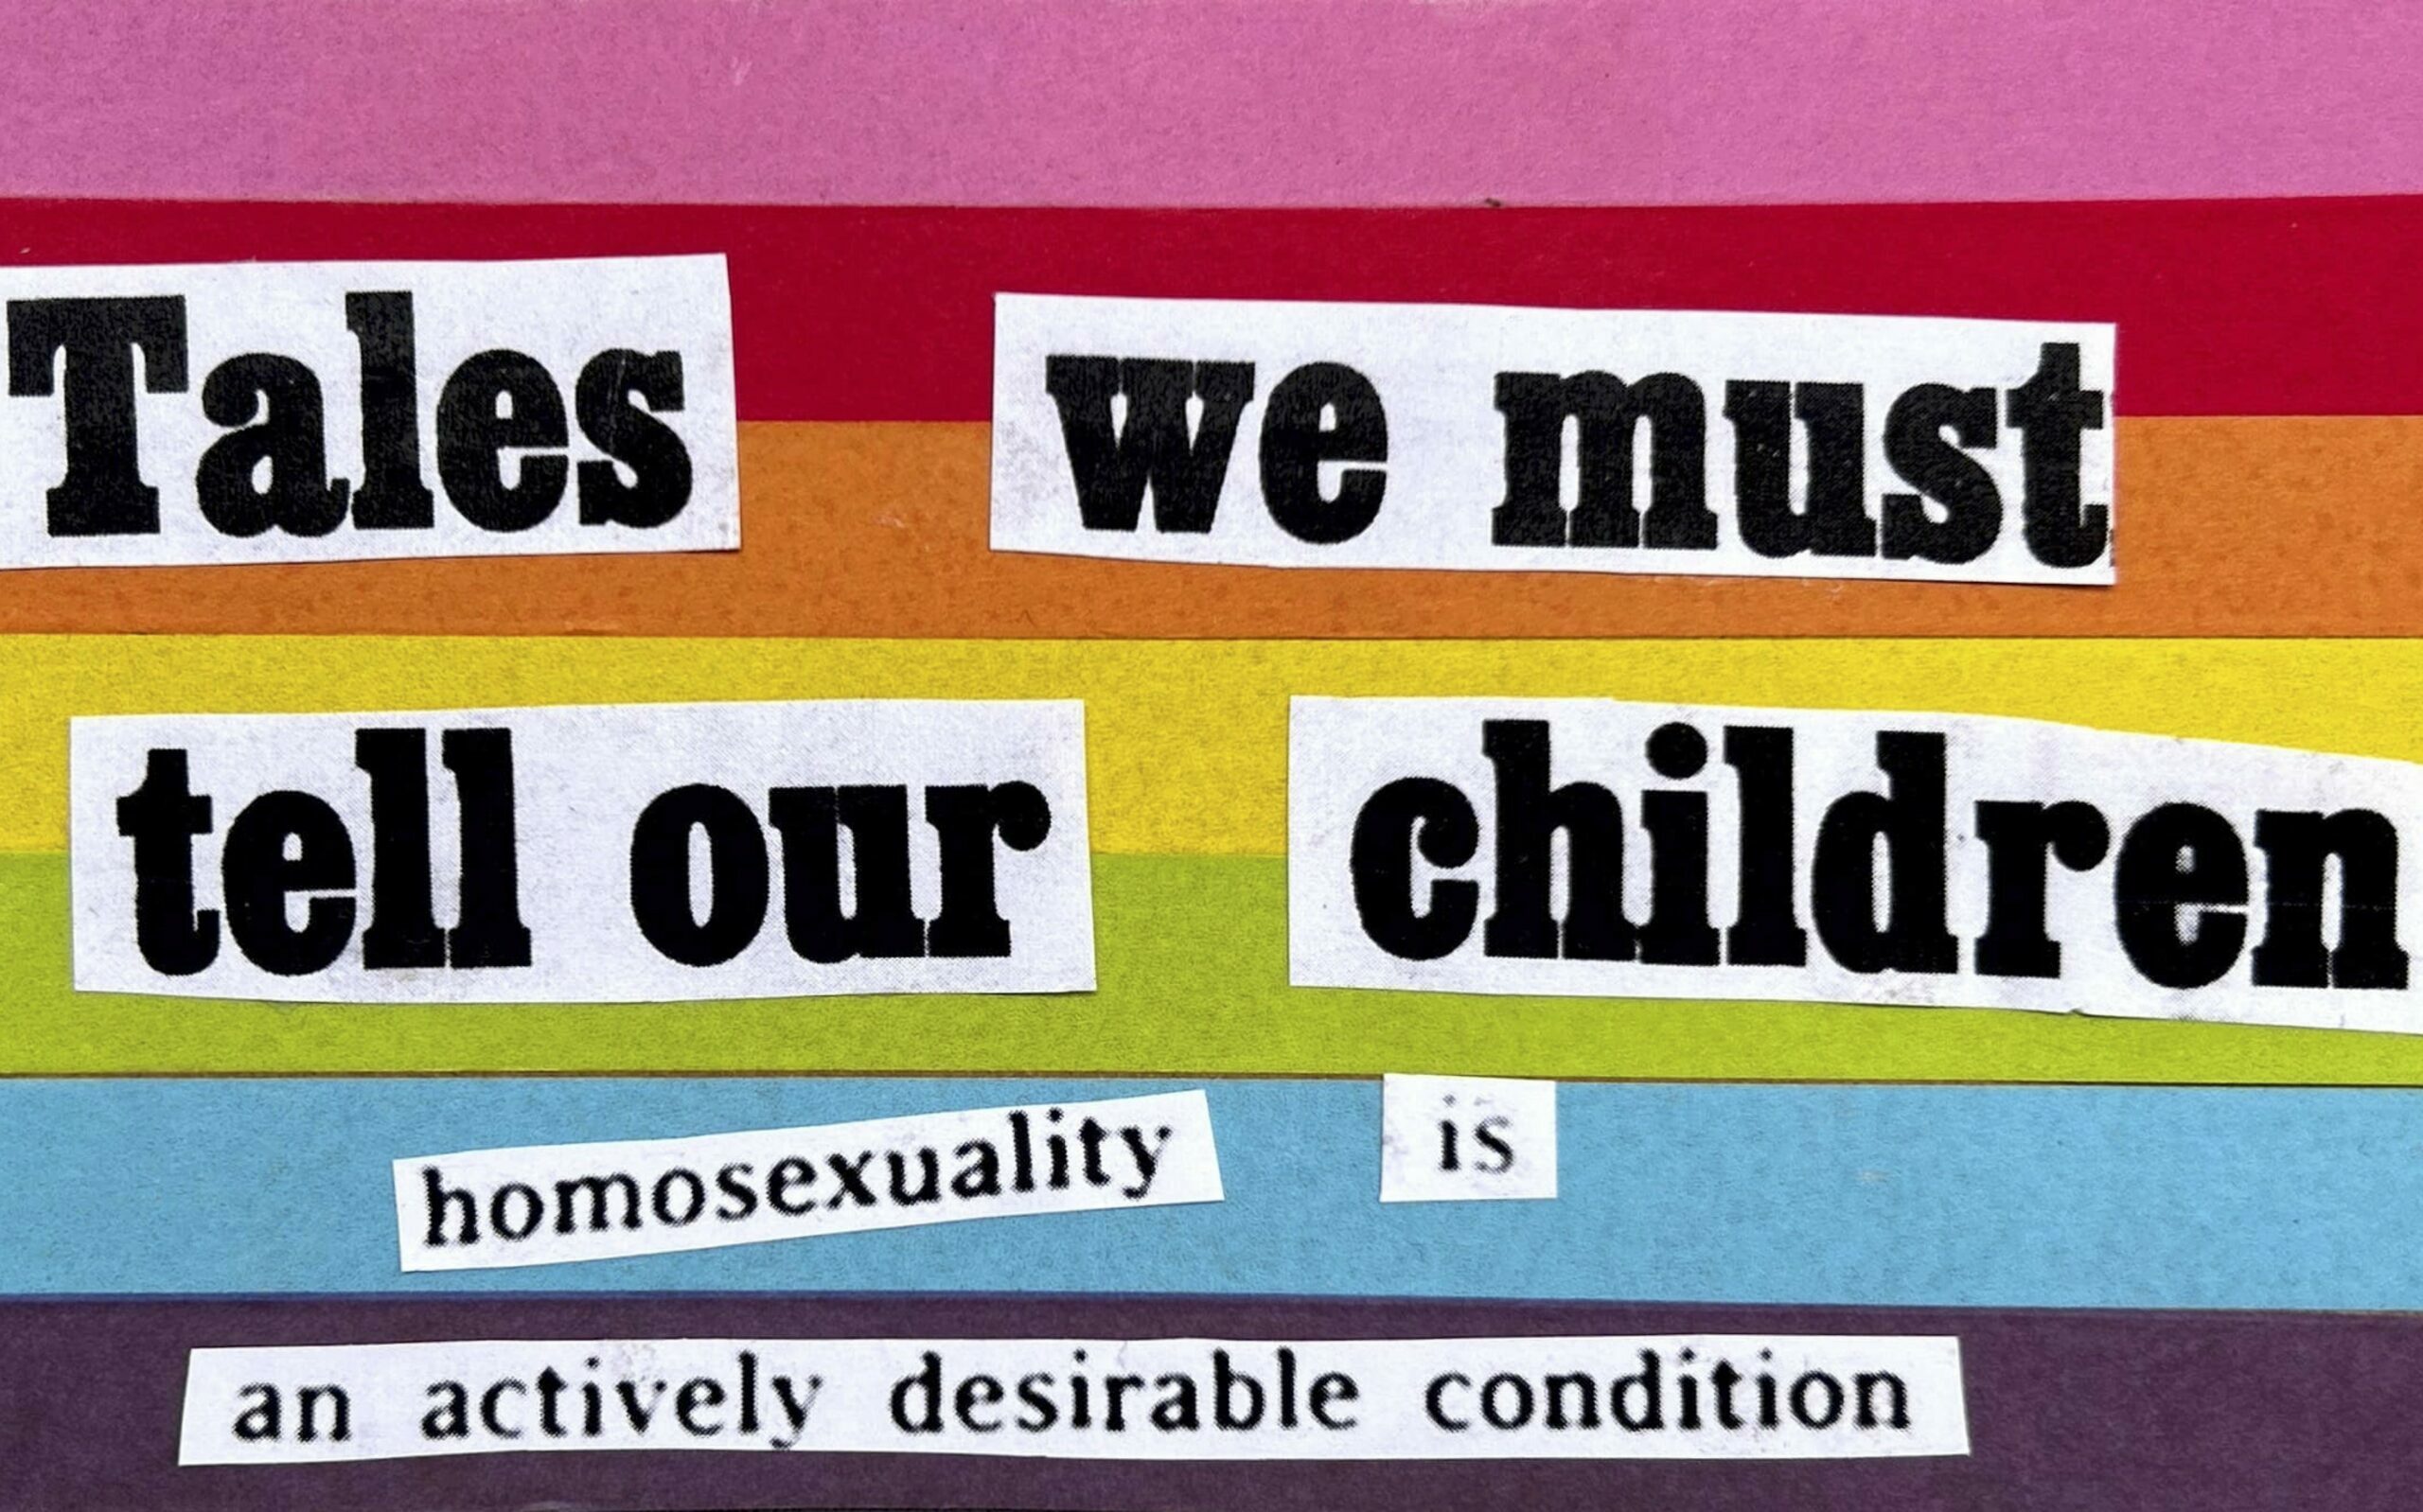 A vibrant rainbow background with thick horizontal stripes in pink, red, orange, yellow, green, blue and purple. In bold black letters are the words 'Tales we must tell our children: homosexuality is an actively desirable condition'.